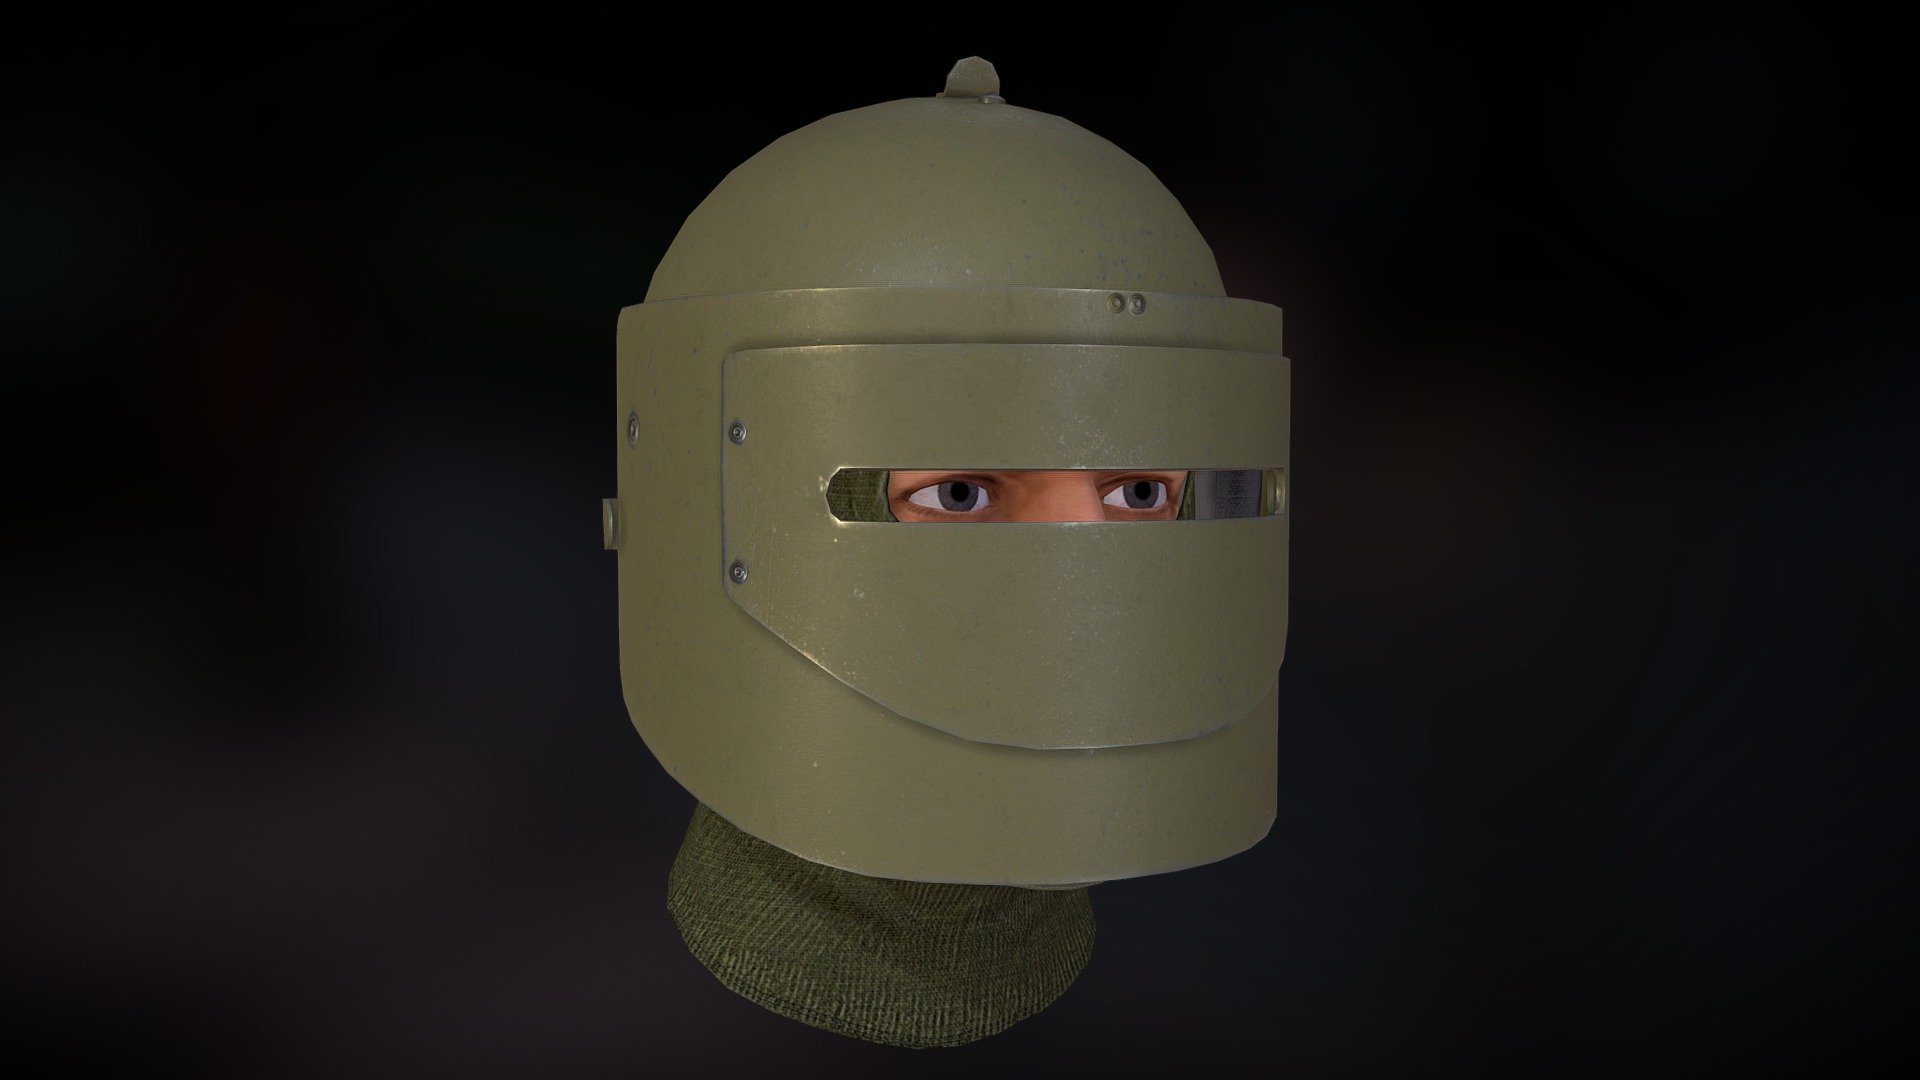 Lowpoly, 3d model with PBR textures.

In the 1990s, the special forces of the MVD and other units received the Mask-1 helmets as a replacement for the Sphere helmet.

This helmet model is modular. You can install two different types of steel visor or remove all modules - visor, harness, visor attachment and fixing parts.
A model of a human head in a balaclava is also supplied with the helmet model.




Helmet verts/tris count: 1344 / 2592

For more detailed information, there is a video presentation: https://youtu.be/1LiHxHwBHlc

Package contains: 
- File format: mb, max, fbx, blend, c4d. 
- Textures resolution: 4096x4096, PNG-Format (Color, Normal, Metallic, Roughness, AO). 7 skins available 3d model